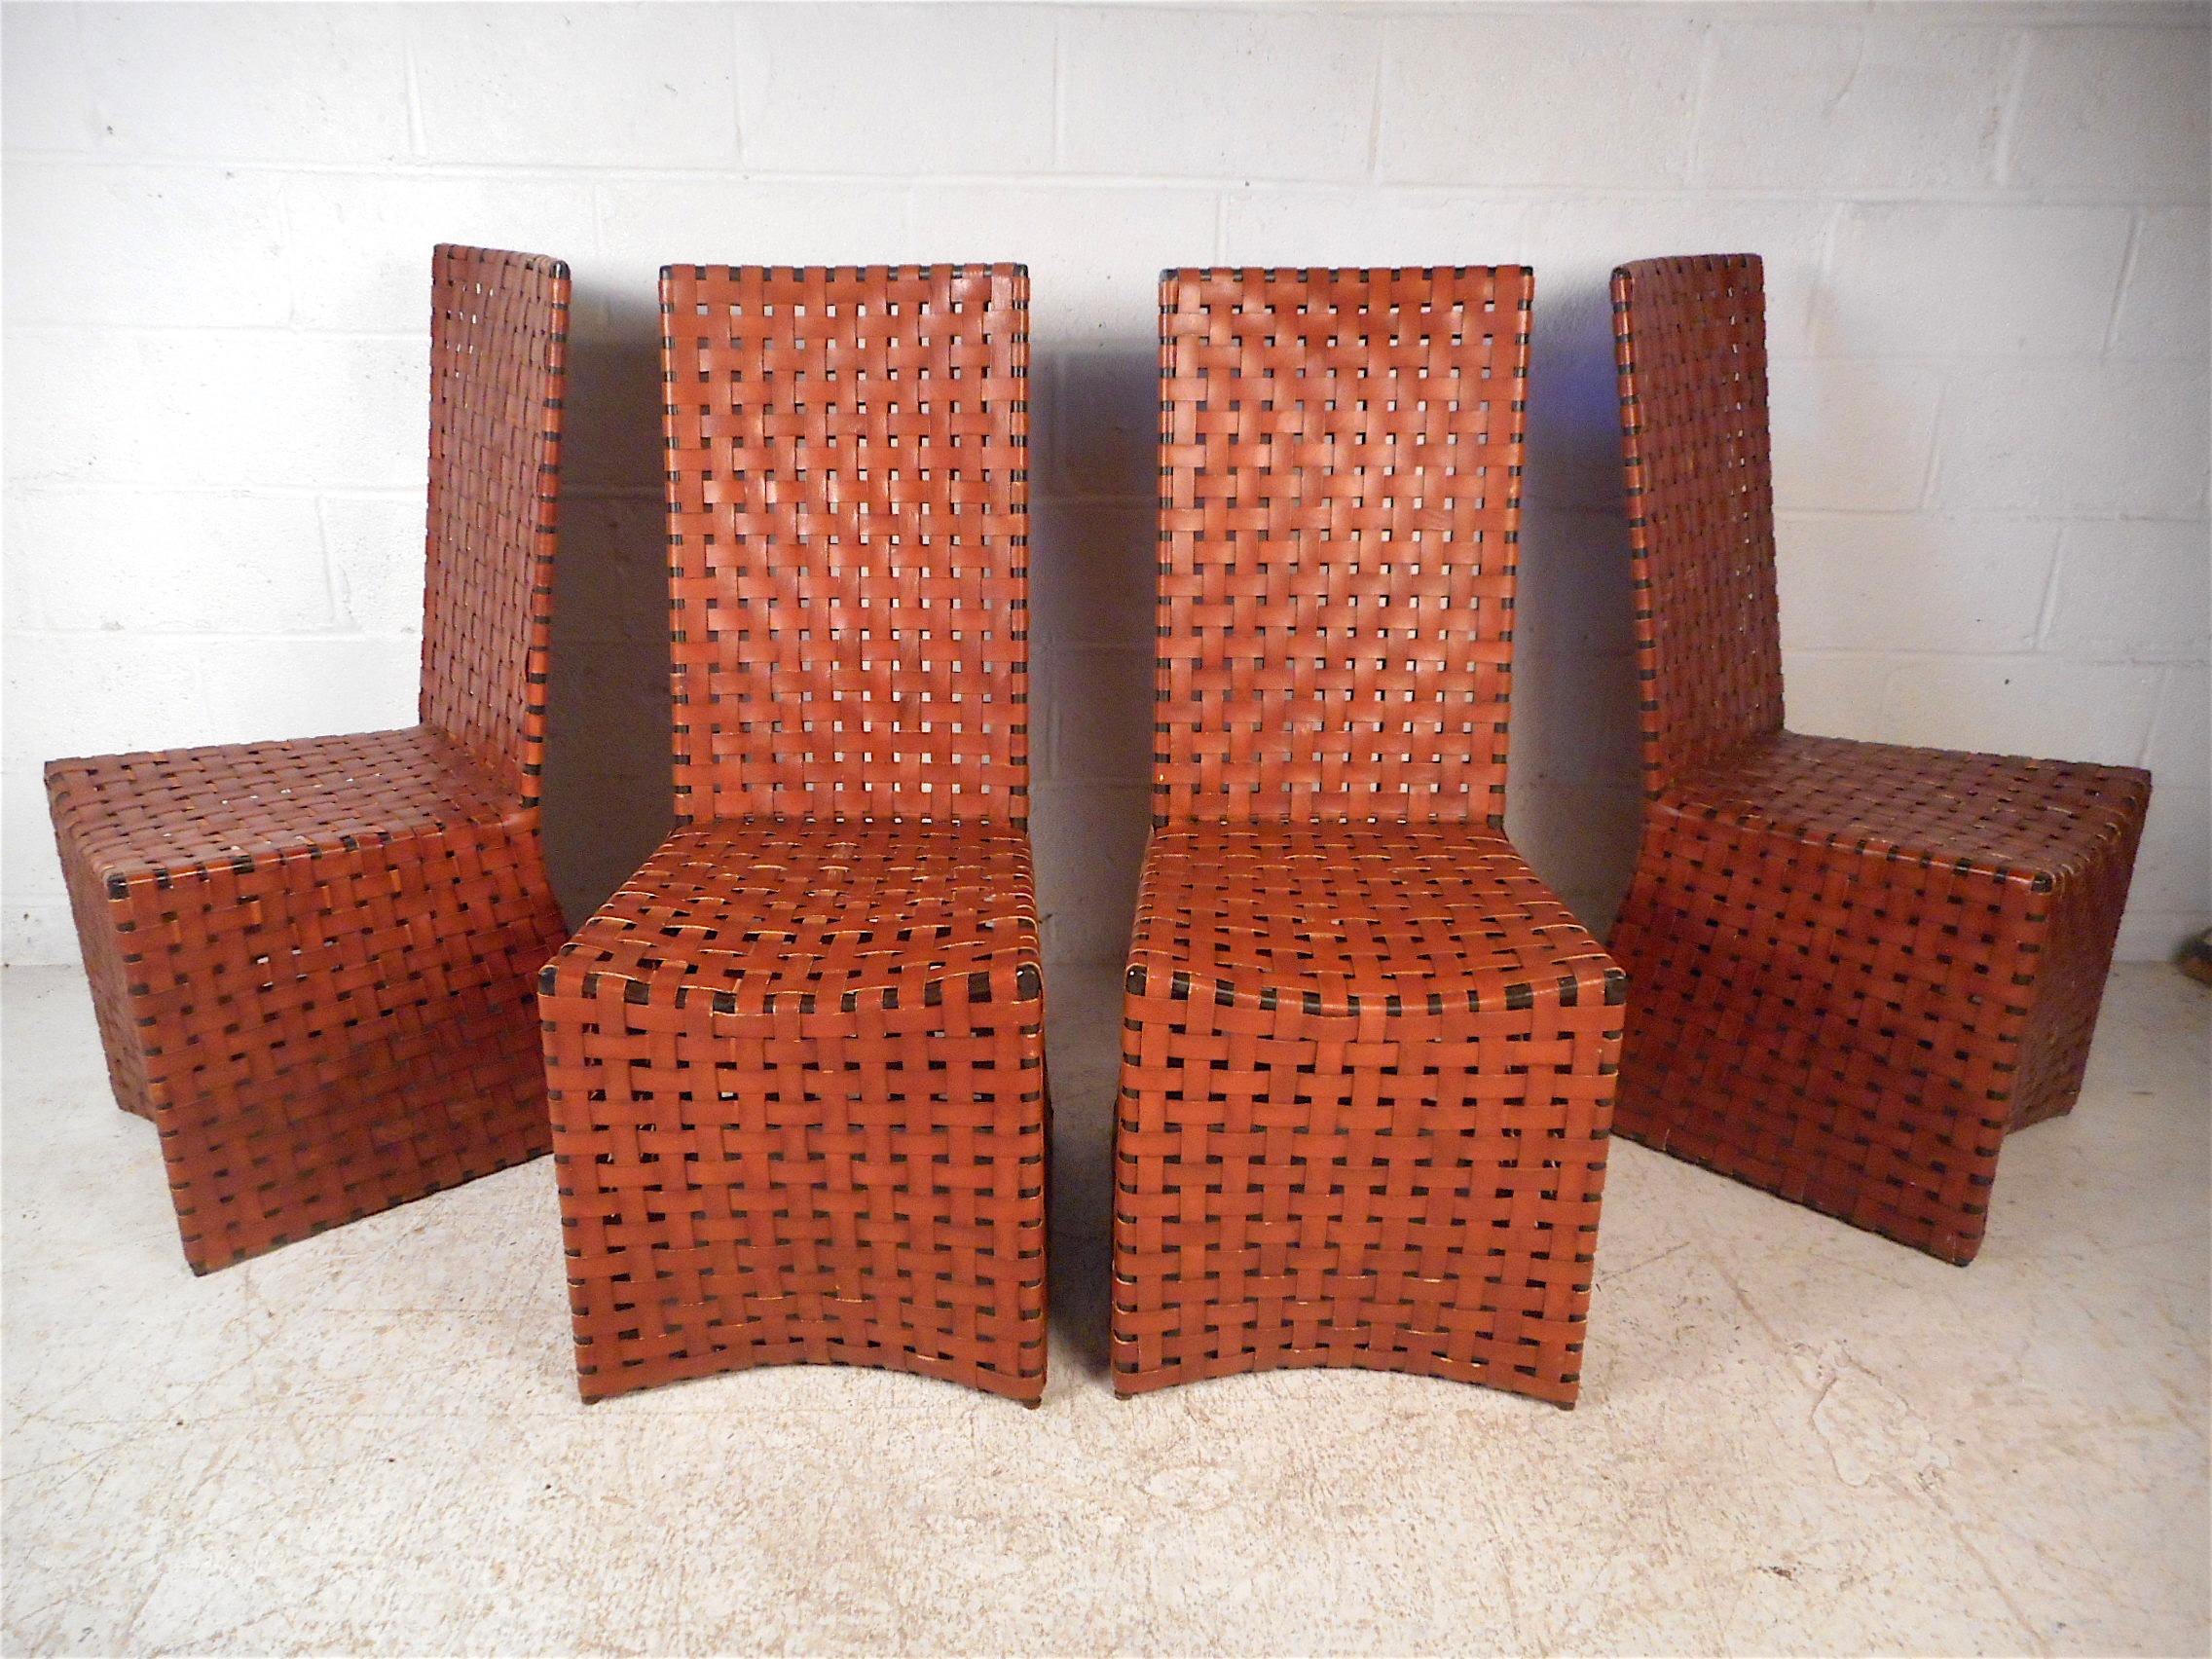 Unique set of 4 vintage modern chairs with a woven leather upholstery and a sturdy metal frame beneath. Tall backs and spacious seats ensure comfort and style. This set of unusual chairs is sure to prove a great addition to any home, business, or